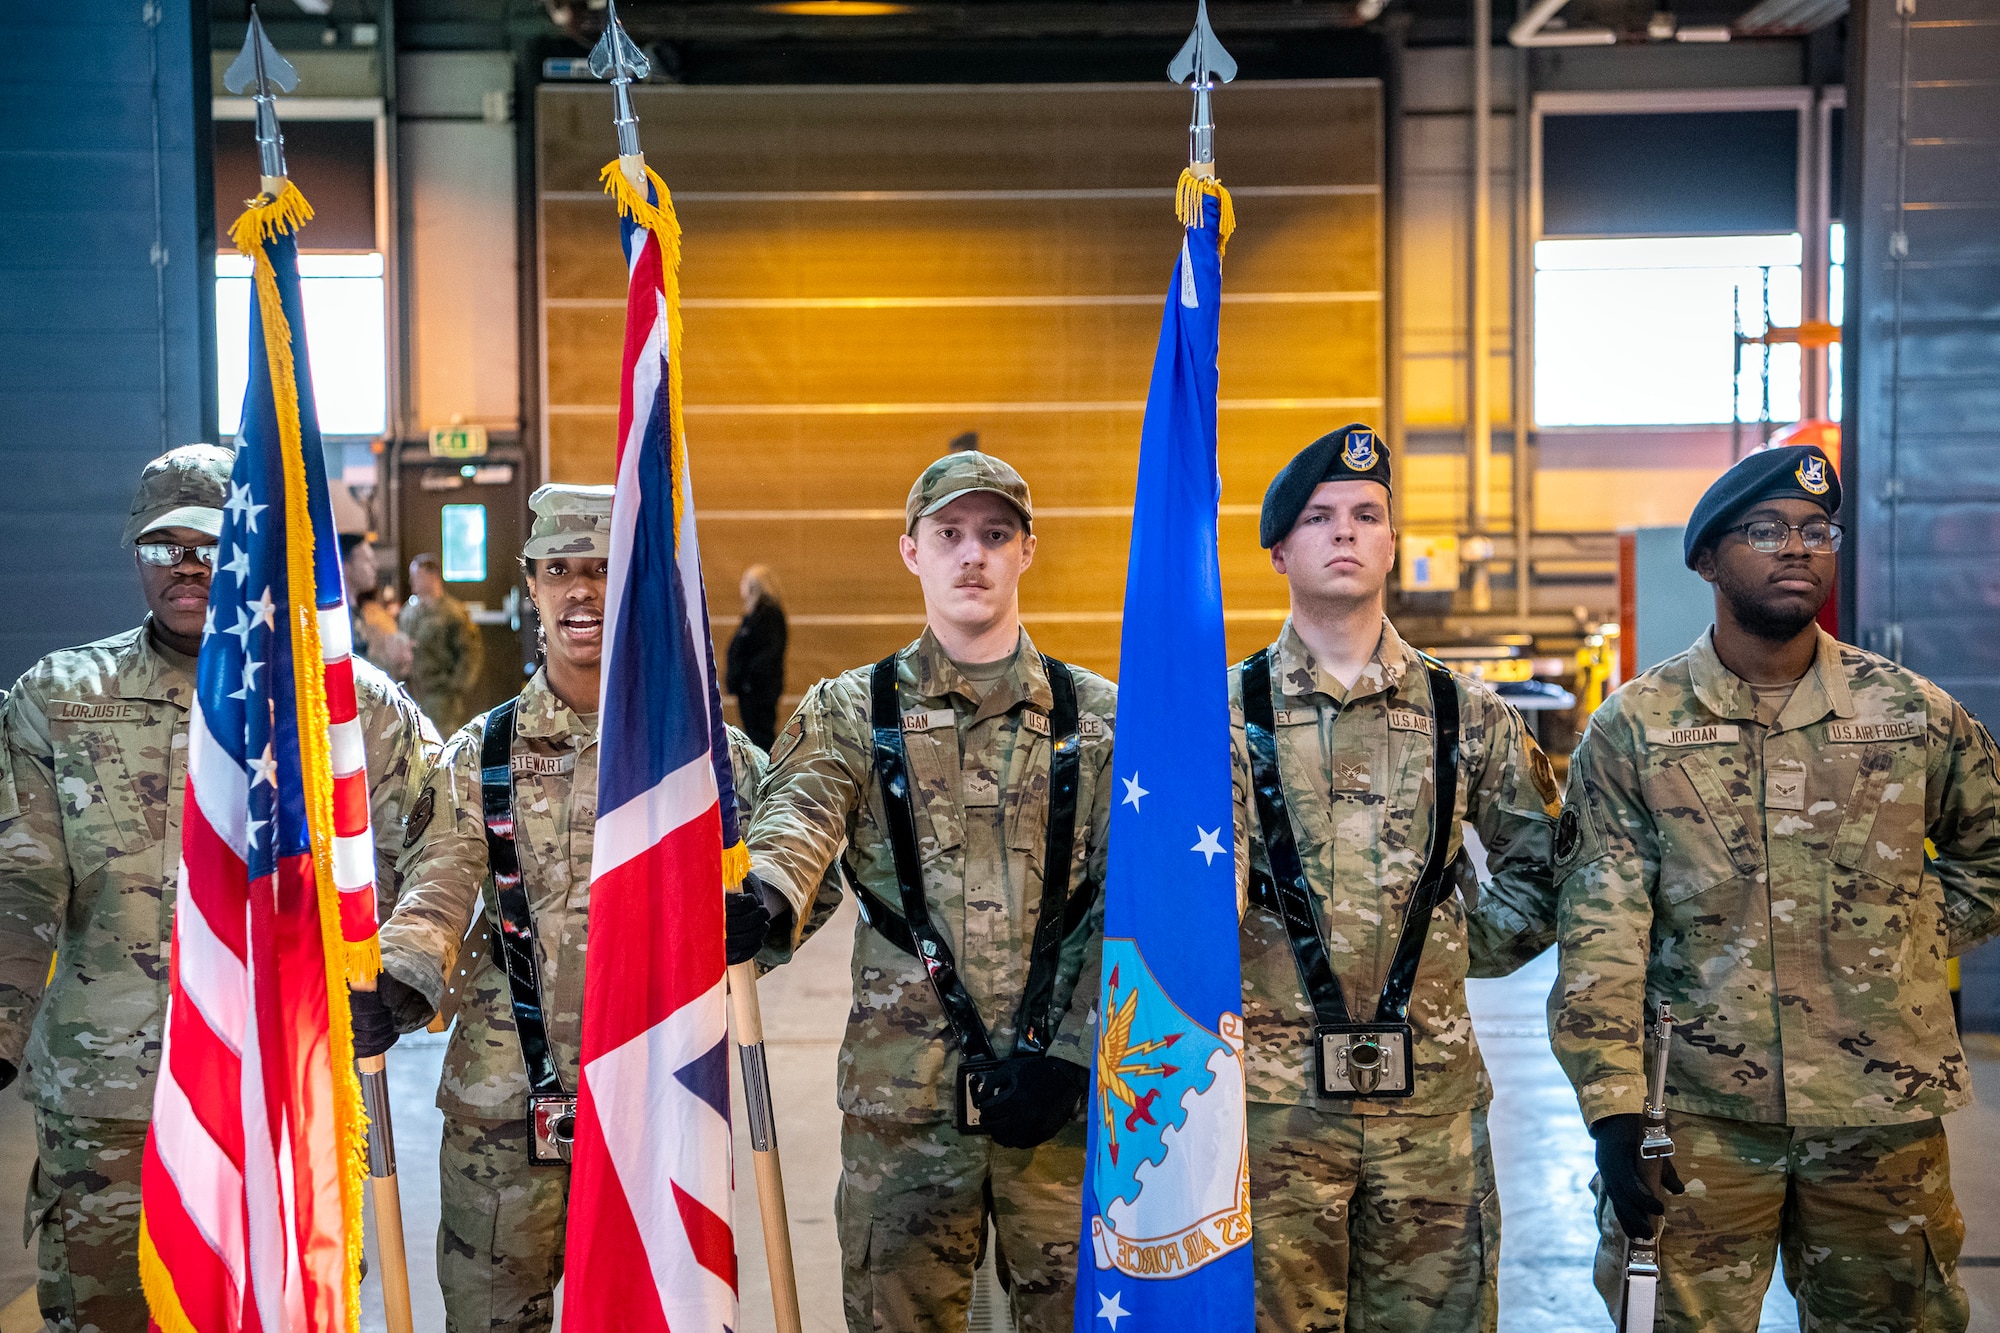 Airmen from the 423d Air Base Group Honor Guard, stand at ease during training at RAF Alconbury, England, April 21, 2023. In order to become HG members, Airmen must complete rigorous initial training to ensure they are qualified to render military honors. (U.S. Air Force photo by Staff Sgt. Eugene Oliver)